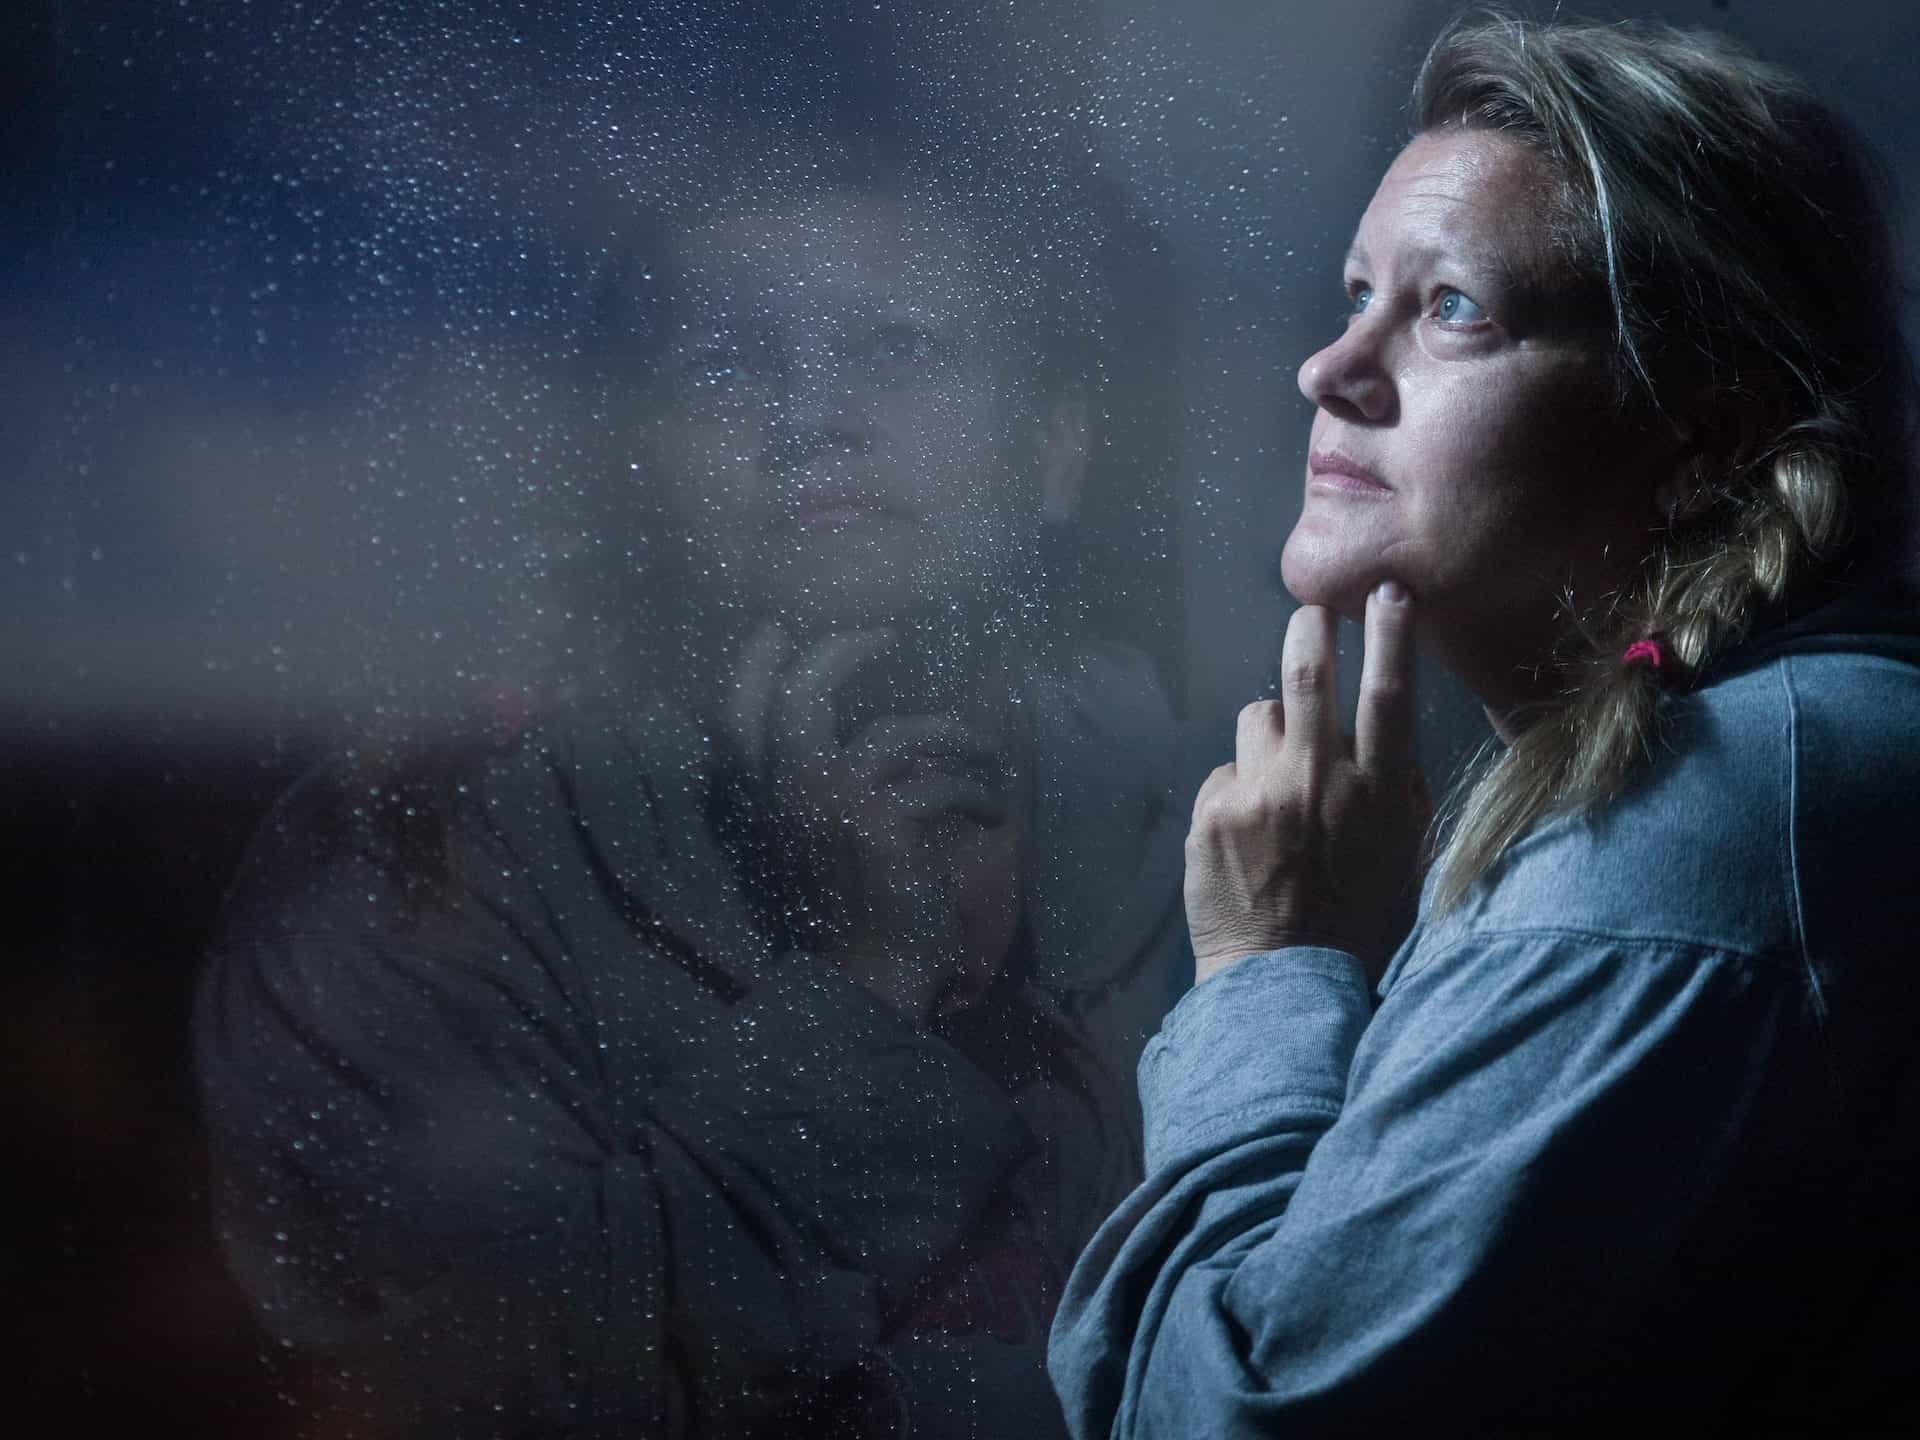 Contemplative woman in blue shirt looking out window with reflection